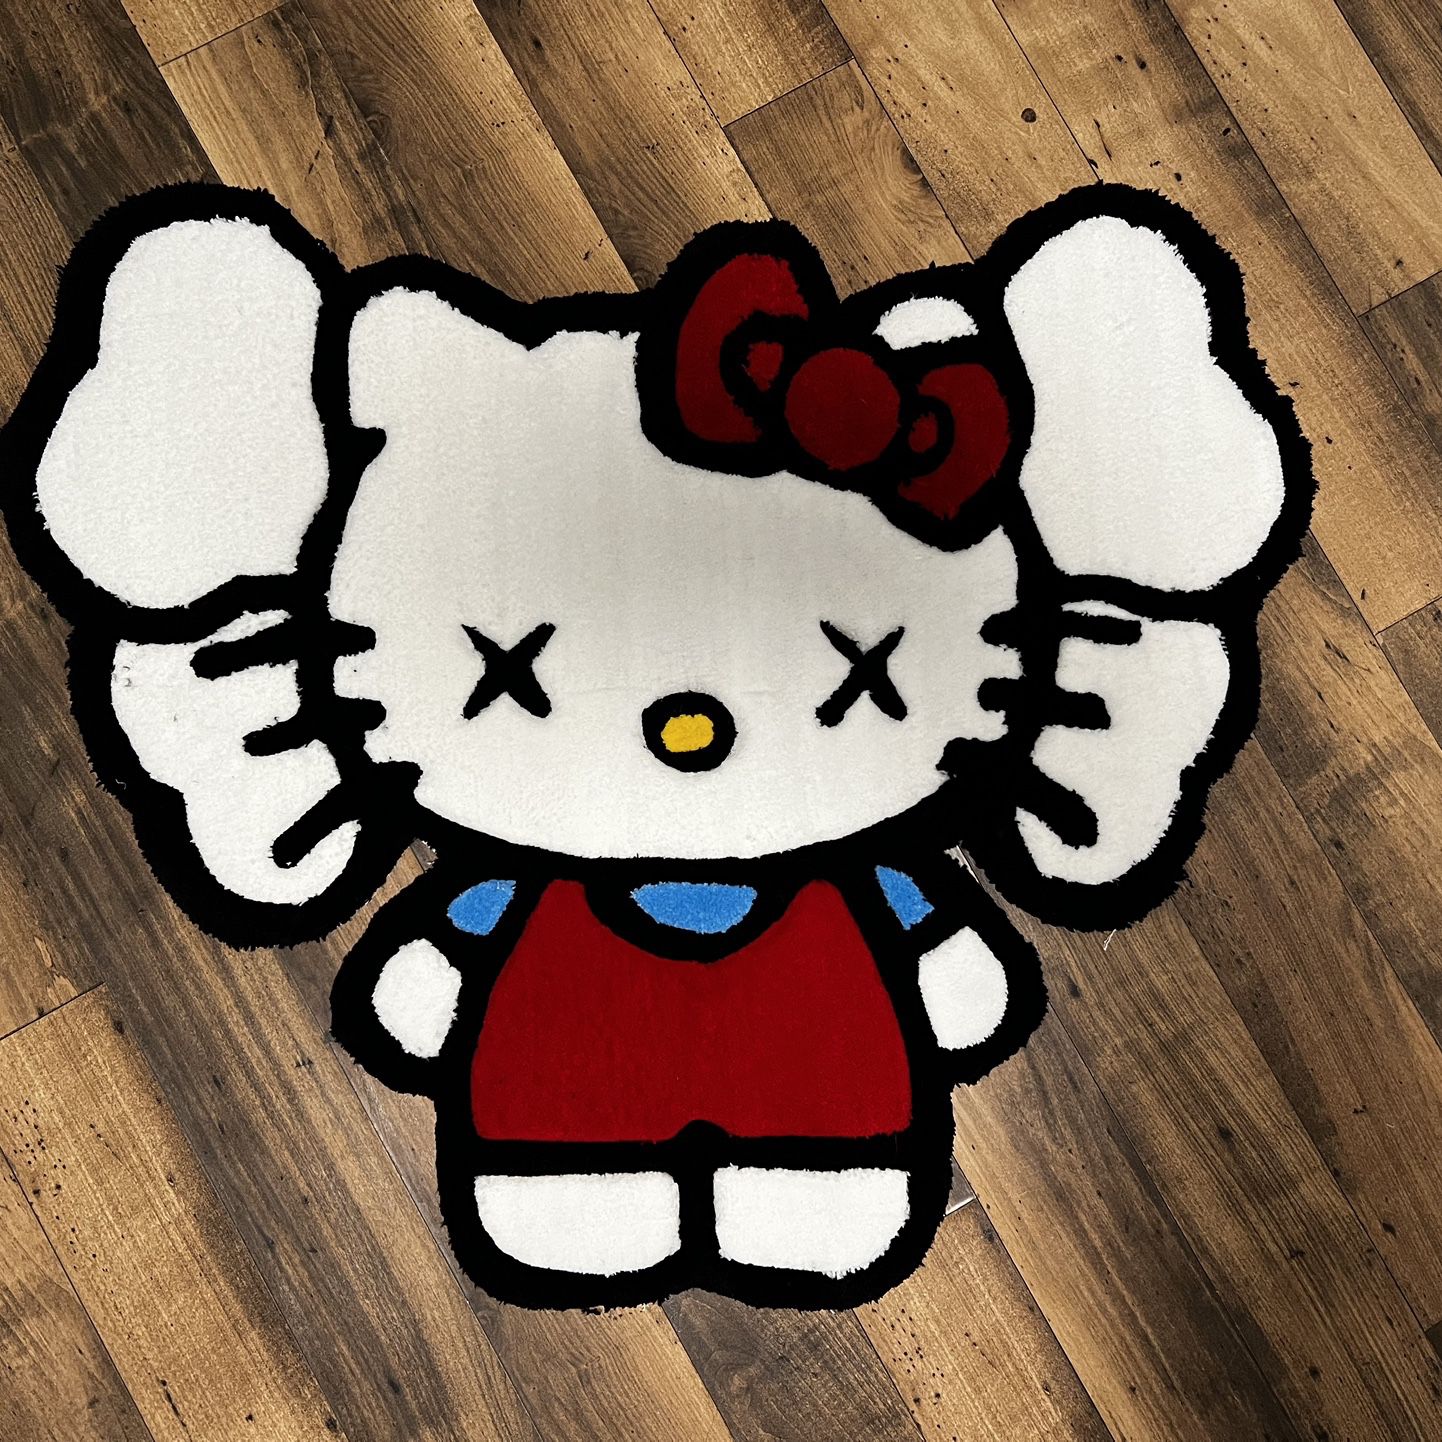 Tufting Rug Hello Kitty for Sale in Las Vegas, NV - OfferUp